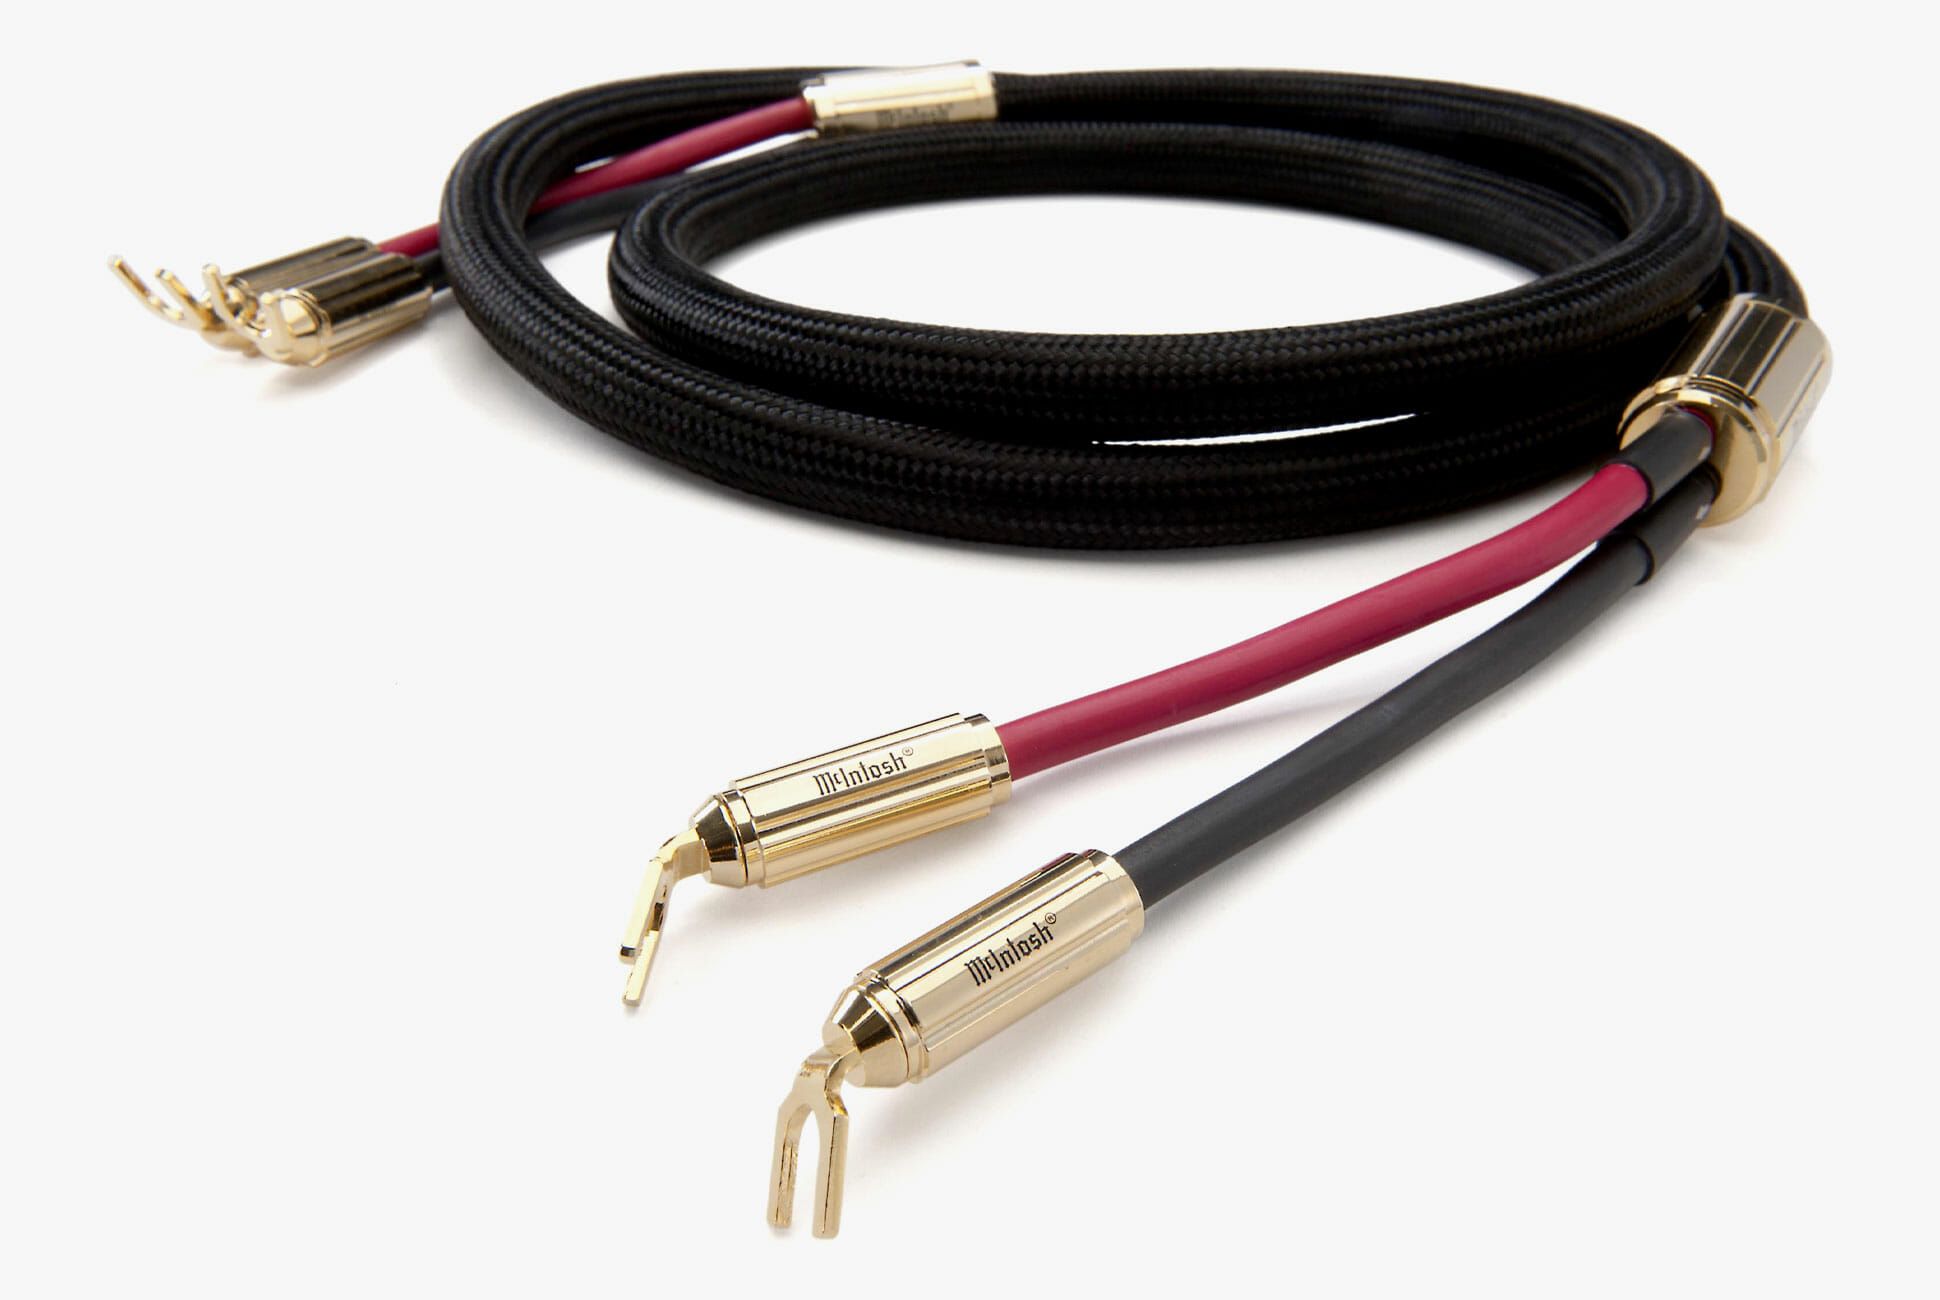 Why Audio Cable Are Expensive?